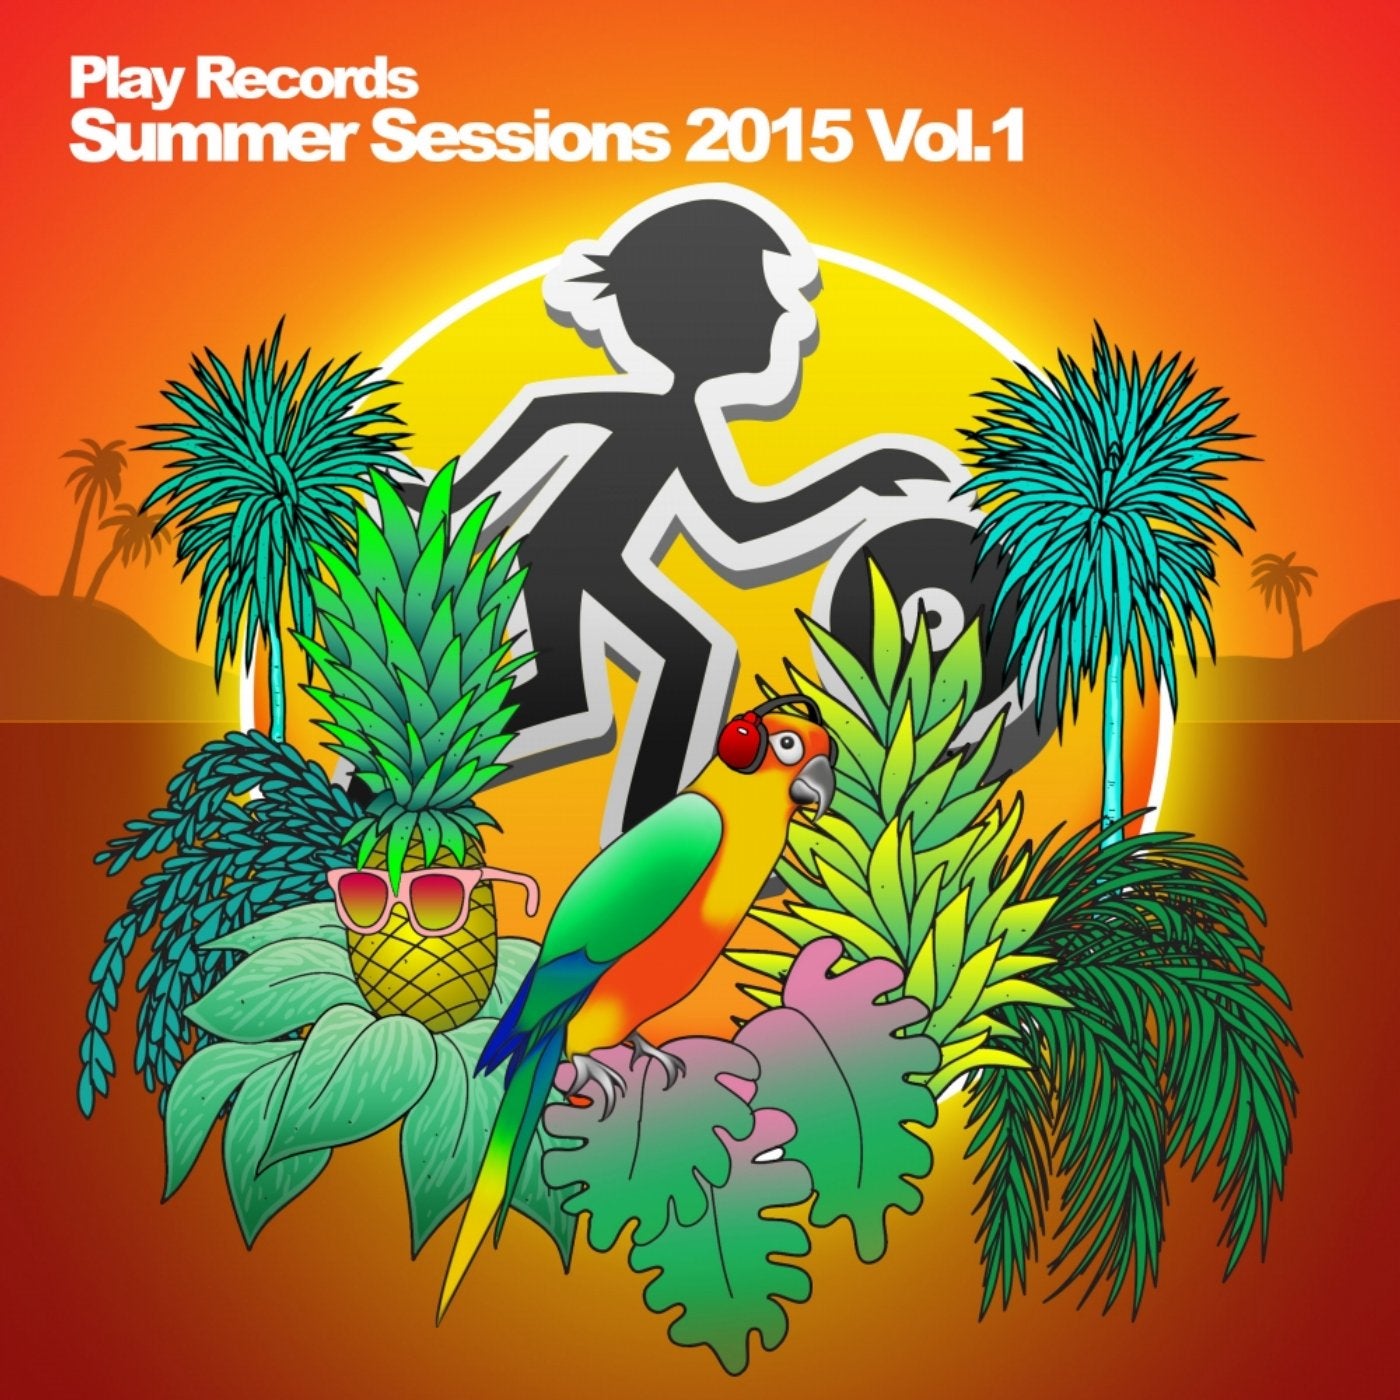 Play Records Summer Sessions 2015, Vol. 1